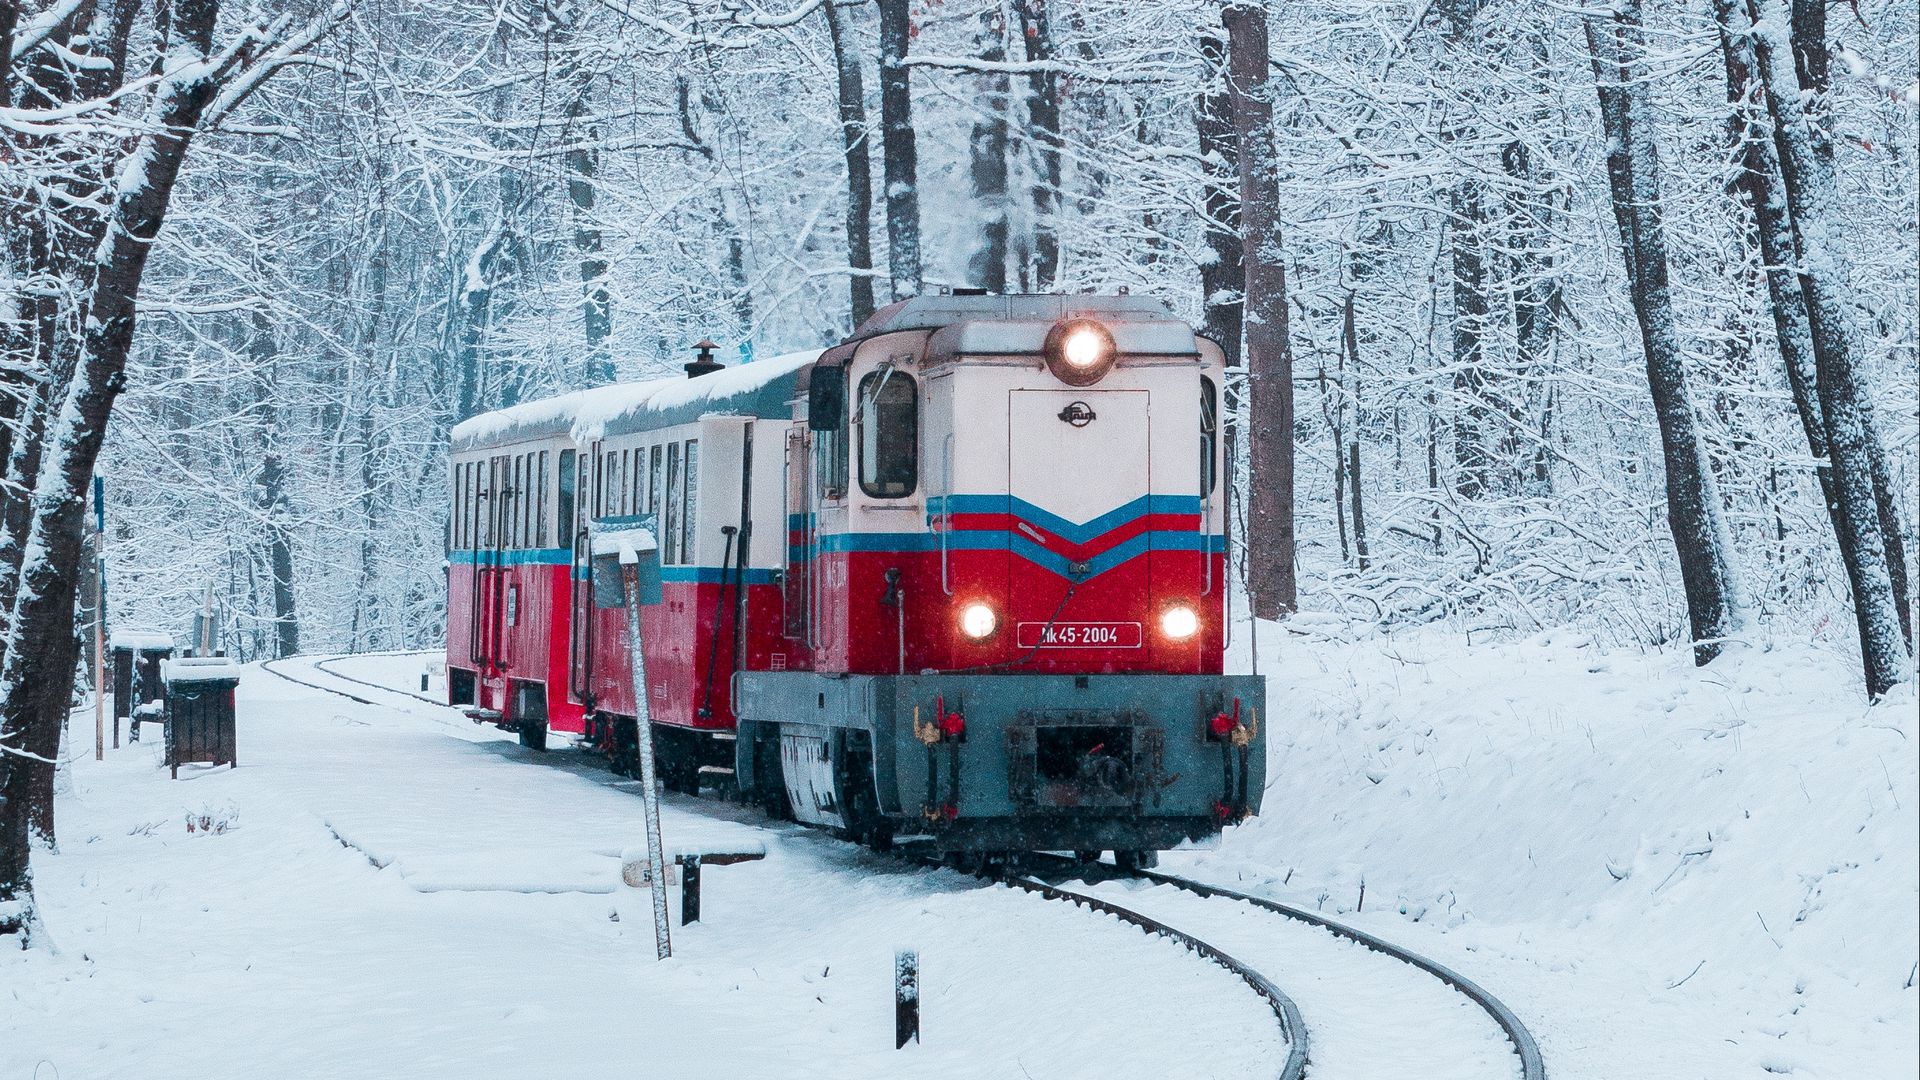 Download wallpaper 1920x1080 train, railway, snow, forest full hd, hdtv,  fhd, 1080p hd background